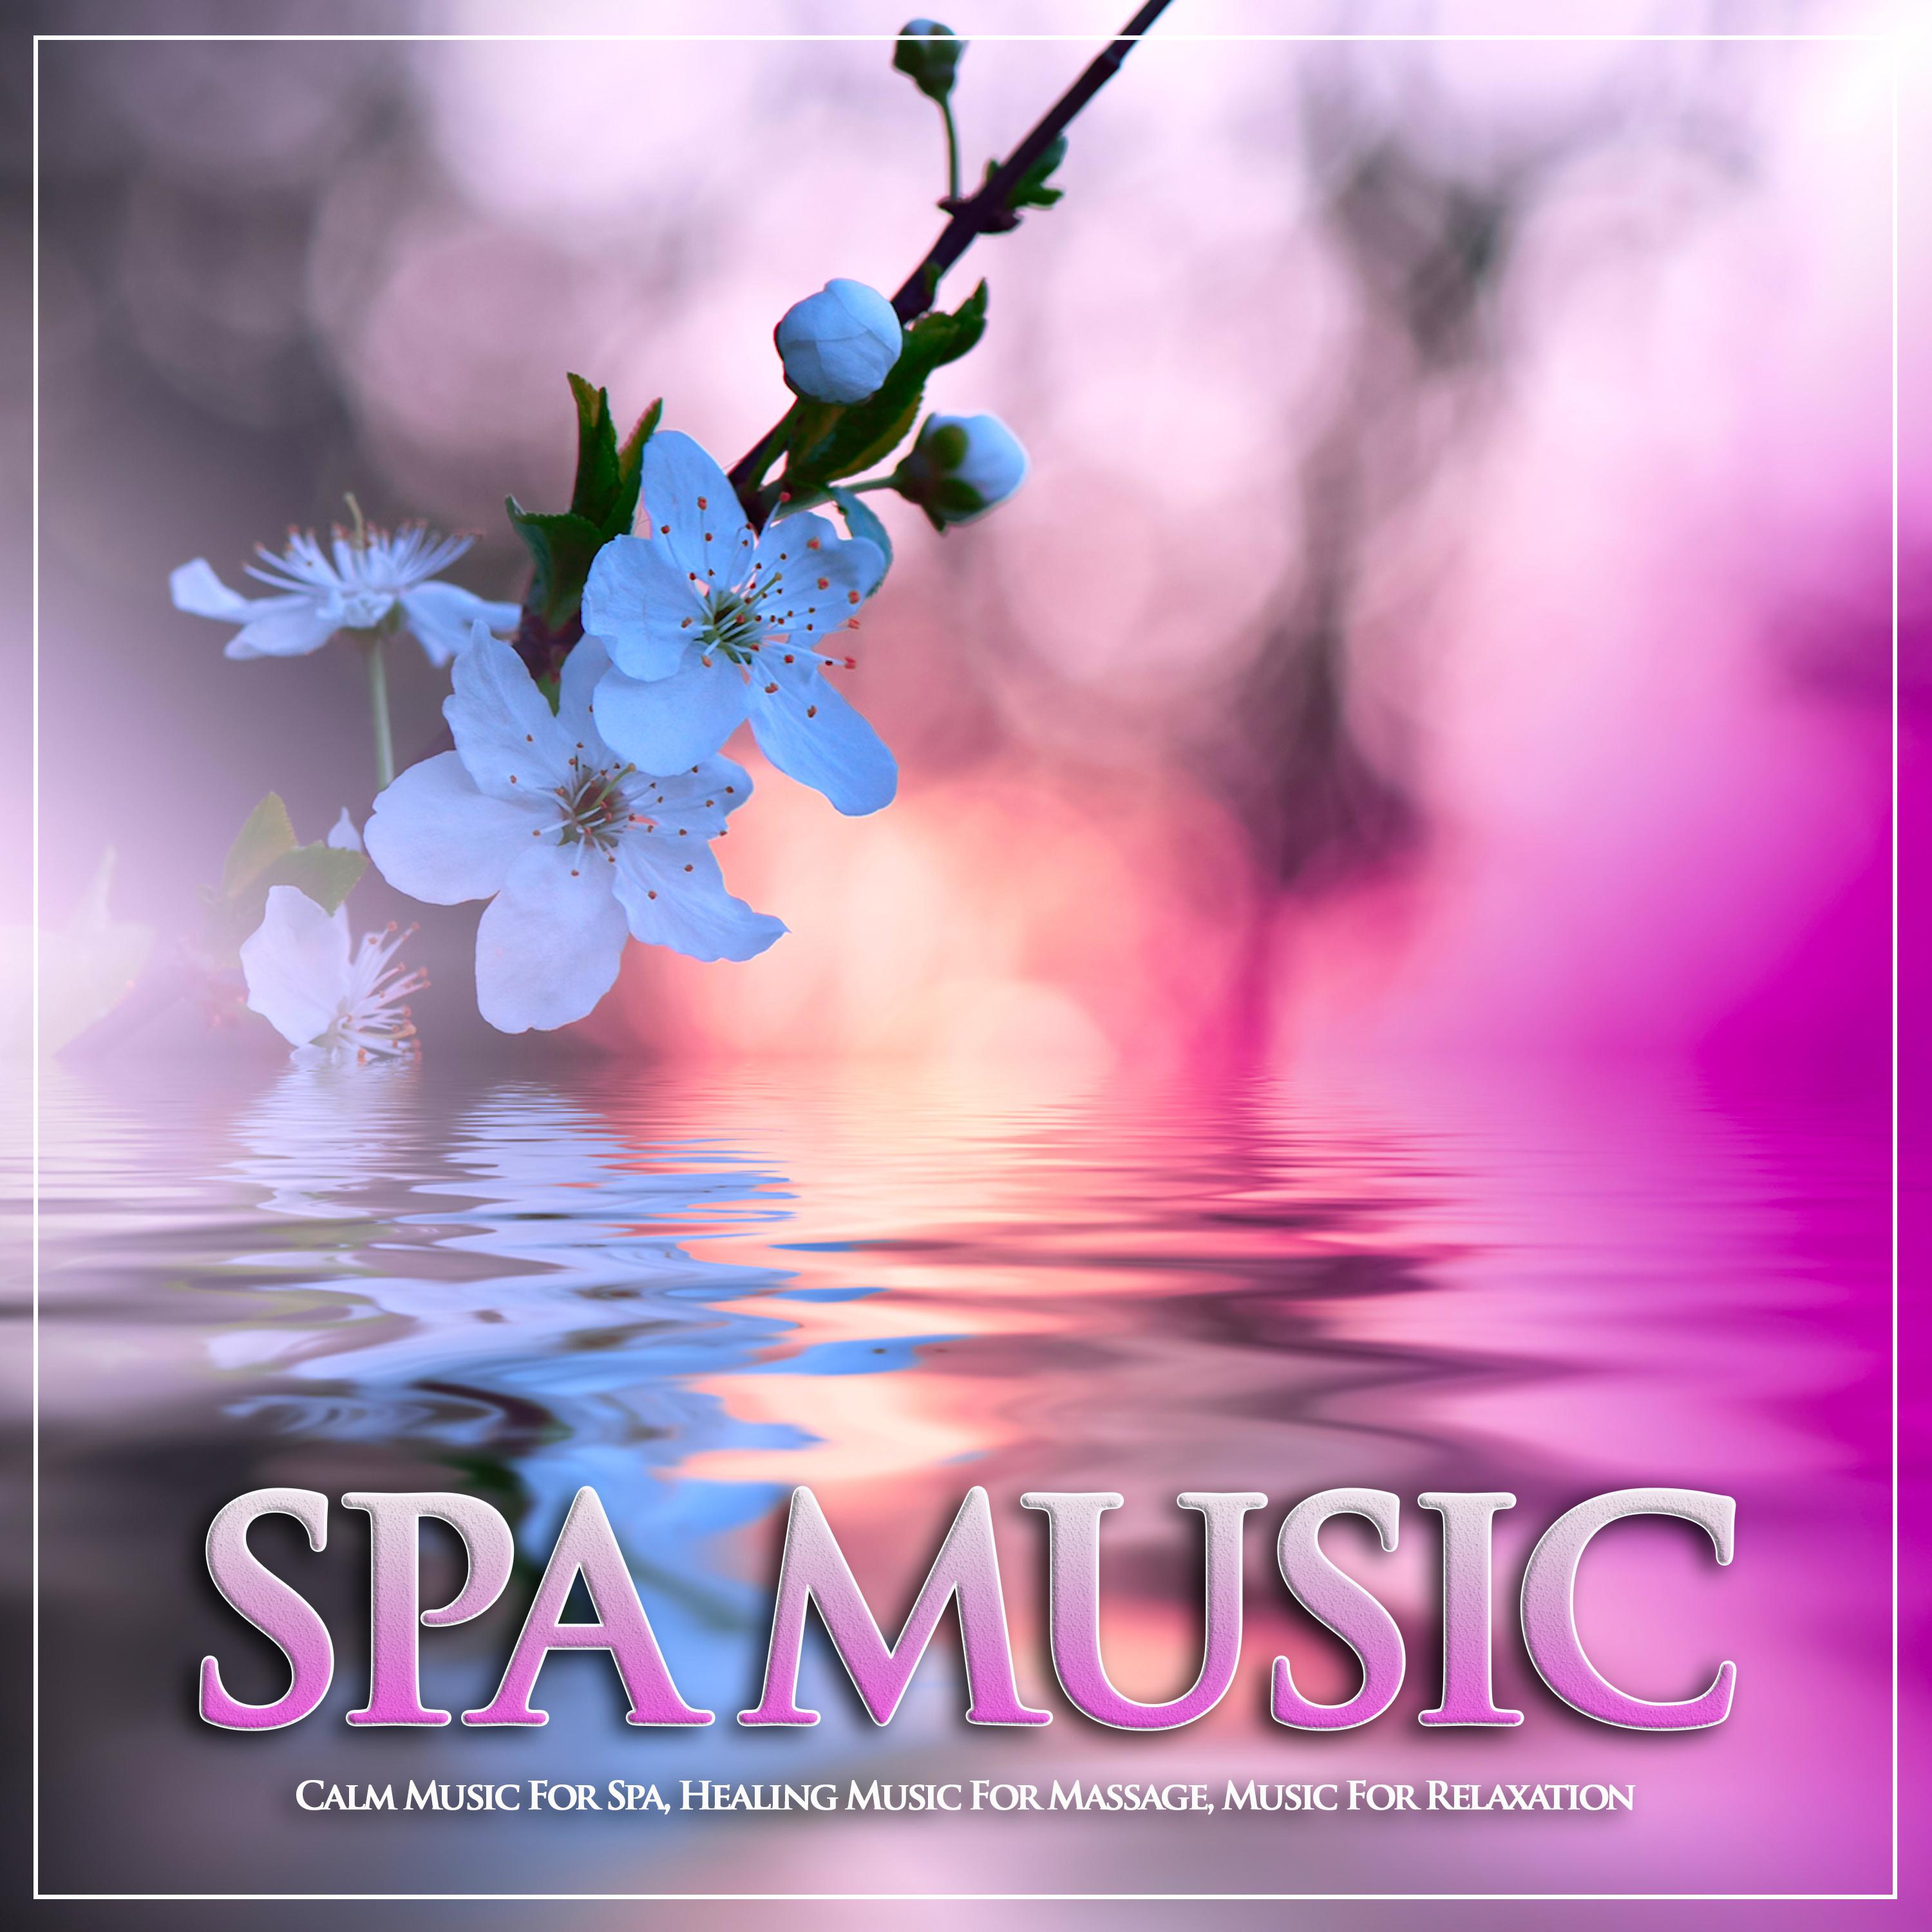 Dog Music: Soothing Music For Dogs, Relaxation Music, Music For Dogs Ears and Calming Music